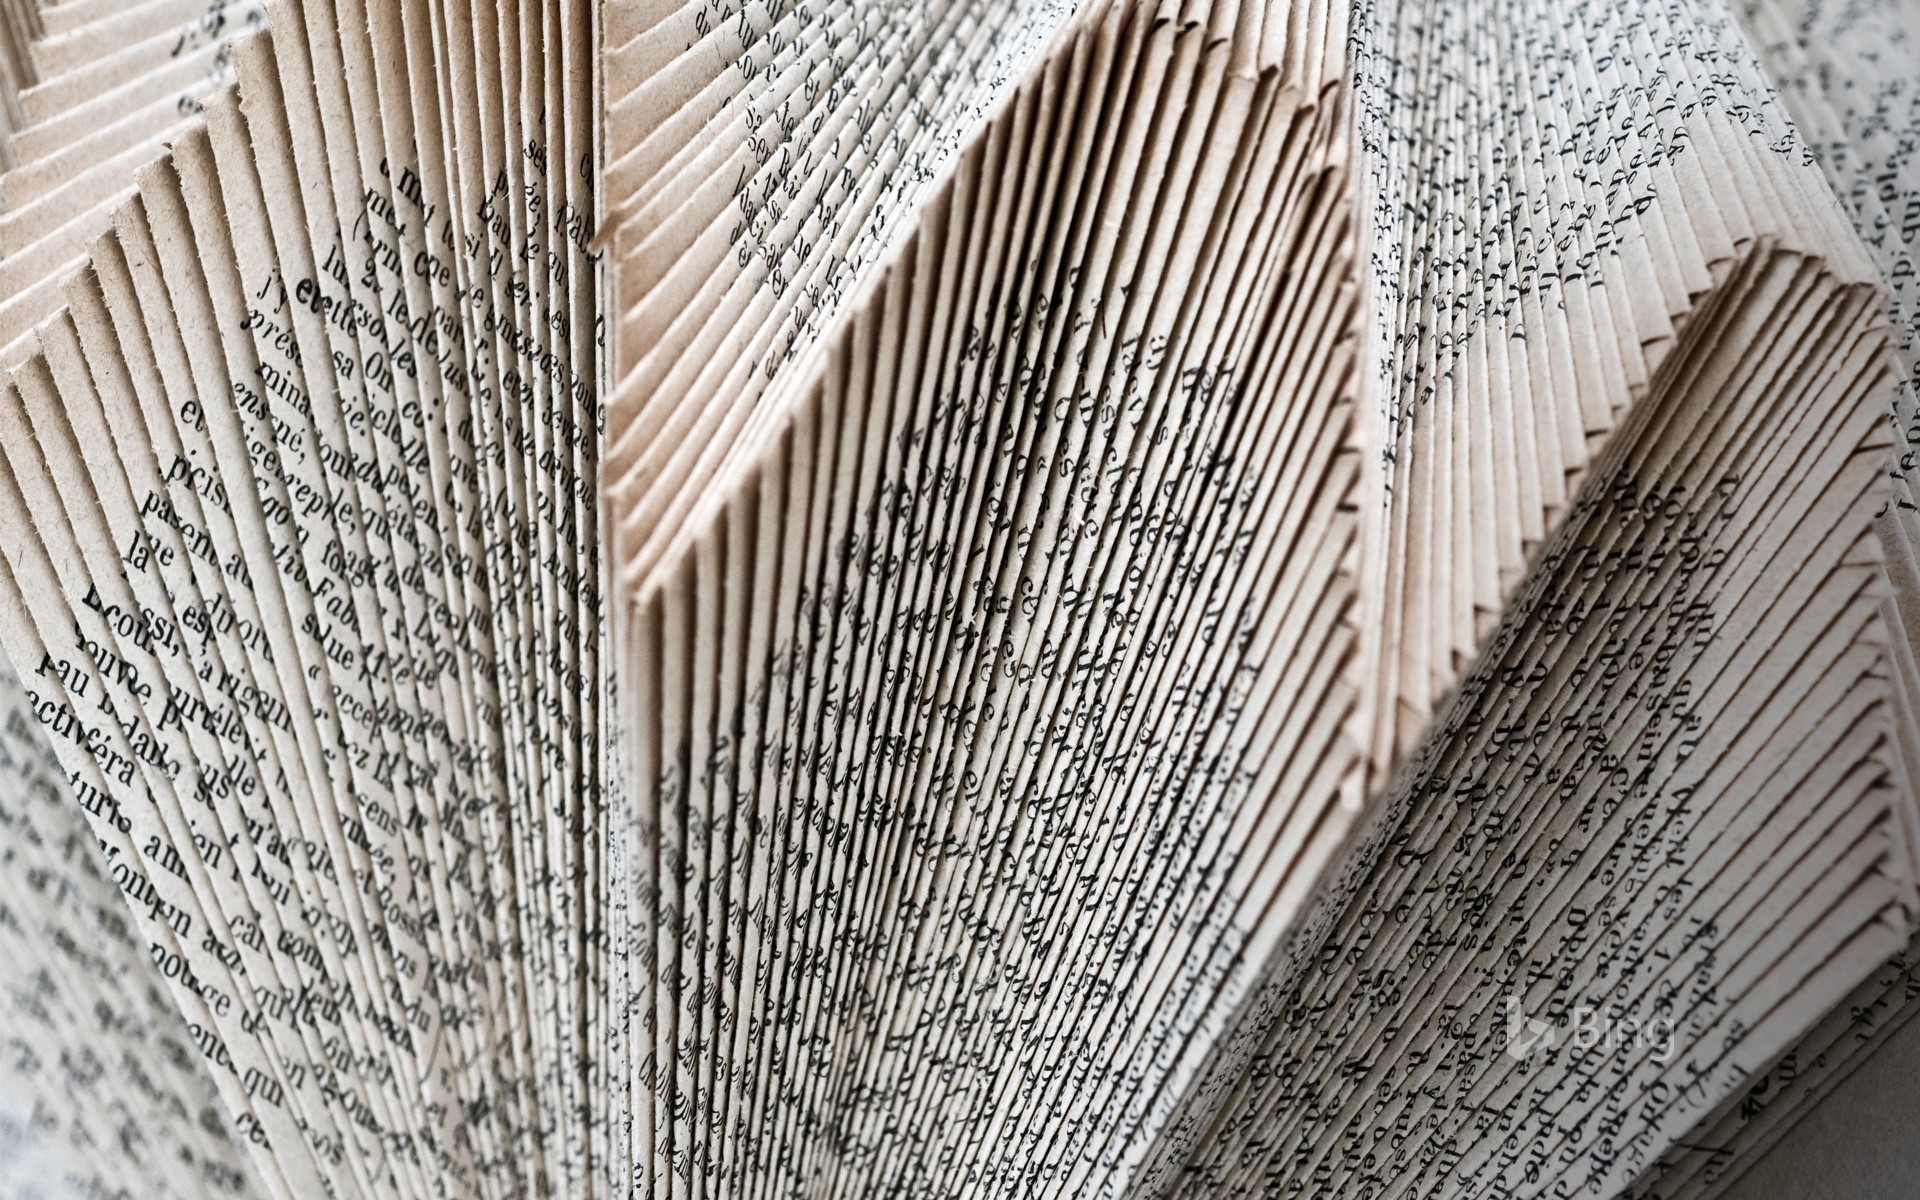 Decorative structure of folded book pages, Angles-sur-l'Anglin, Vienne